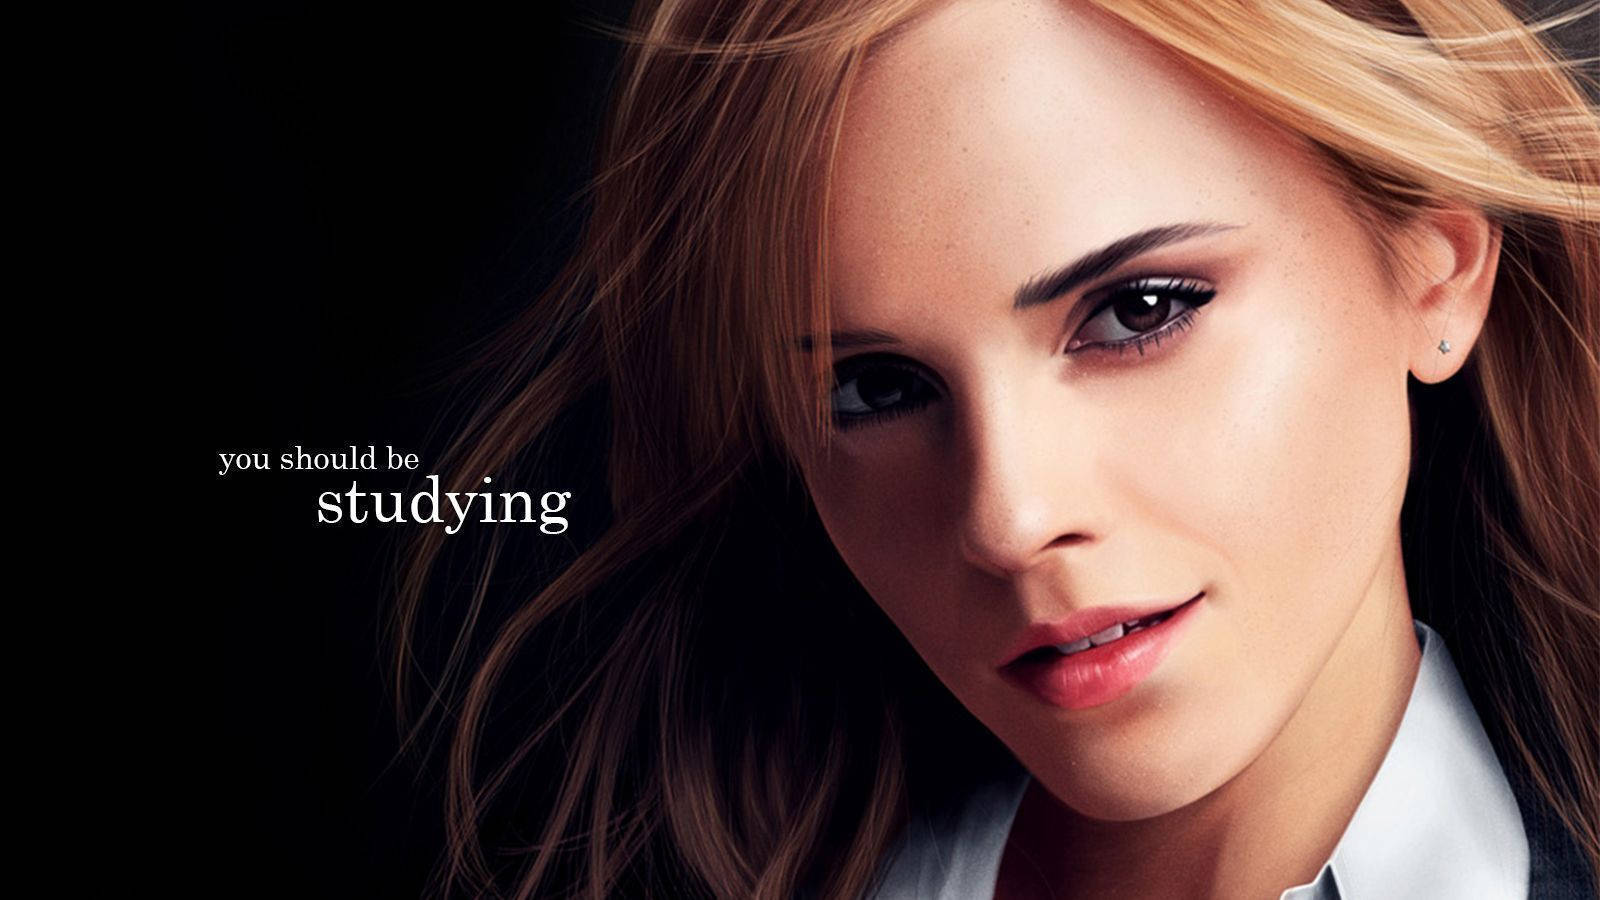 The Mysterious Emma Watson Background